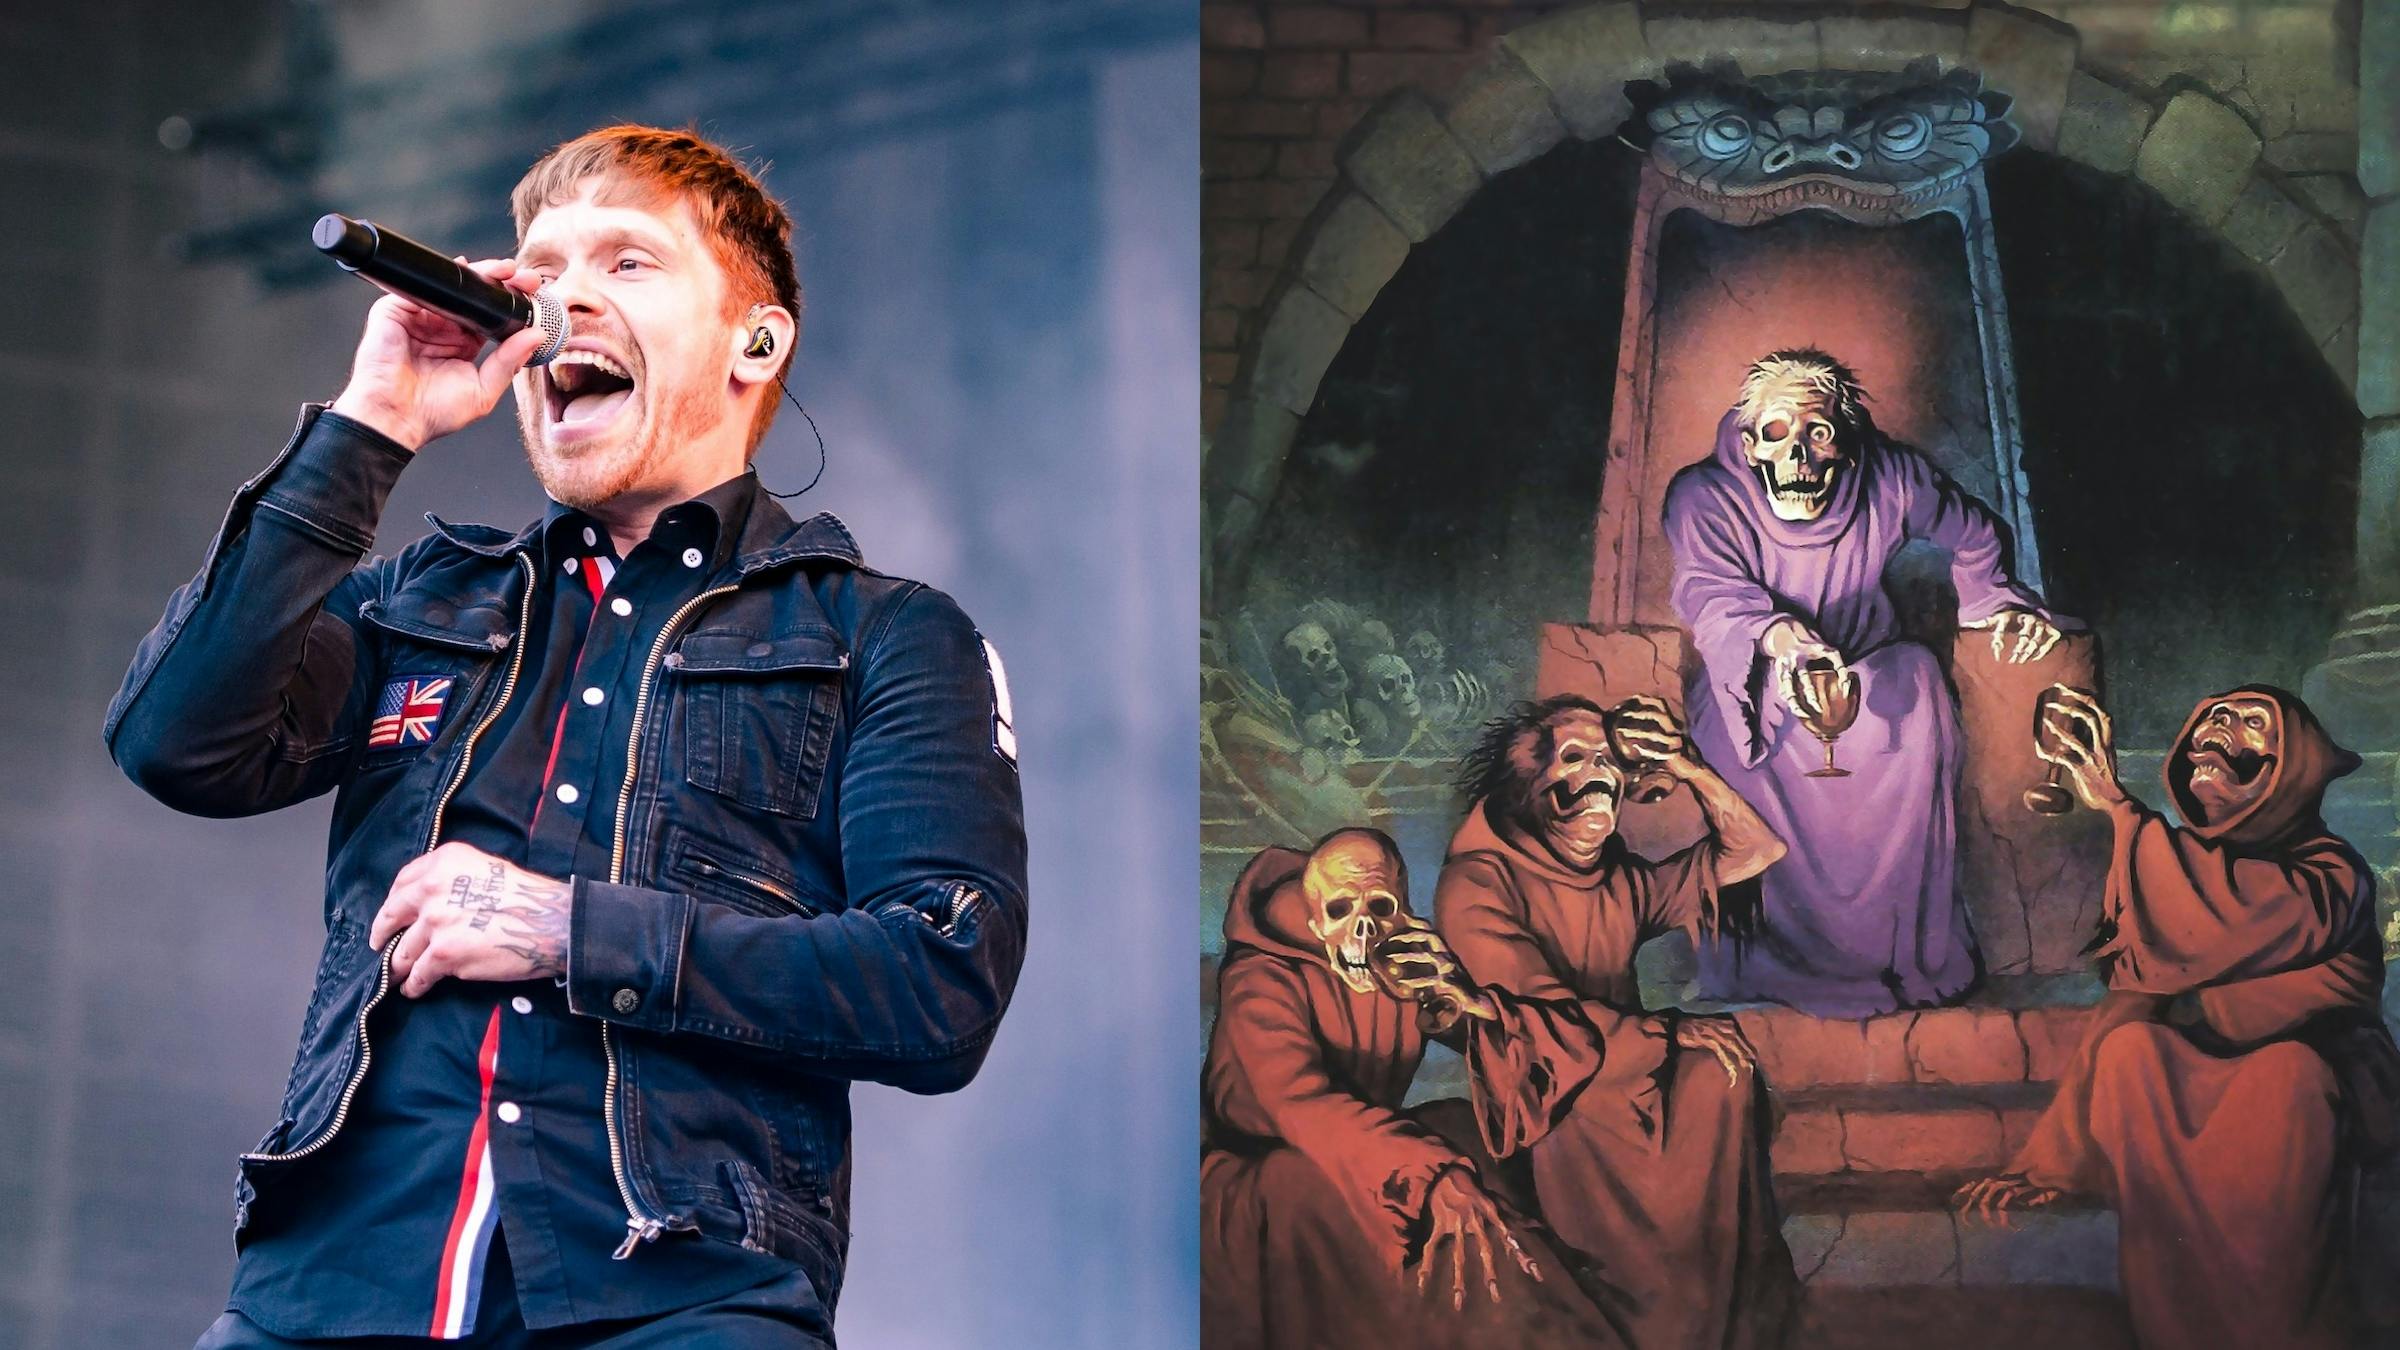 Shinedown's Brent Smith Says The Band Was Influenced By Death Metal